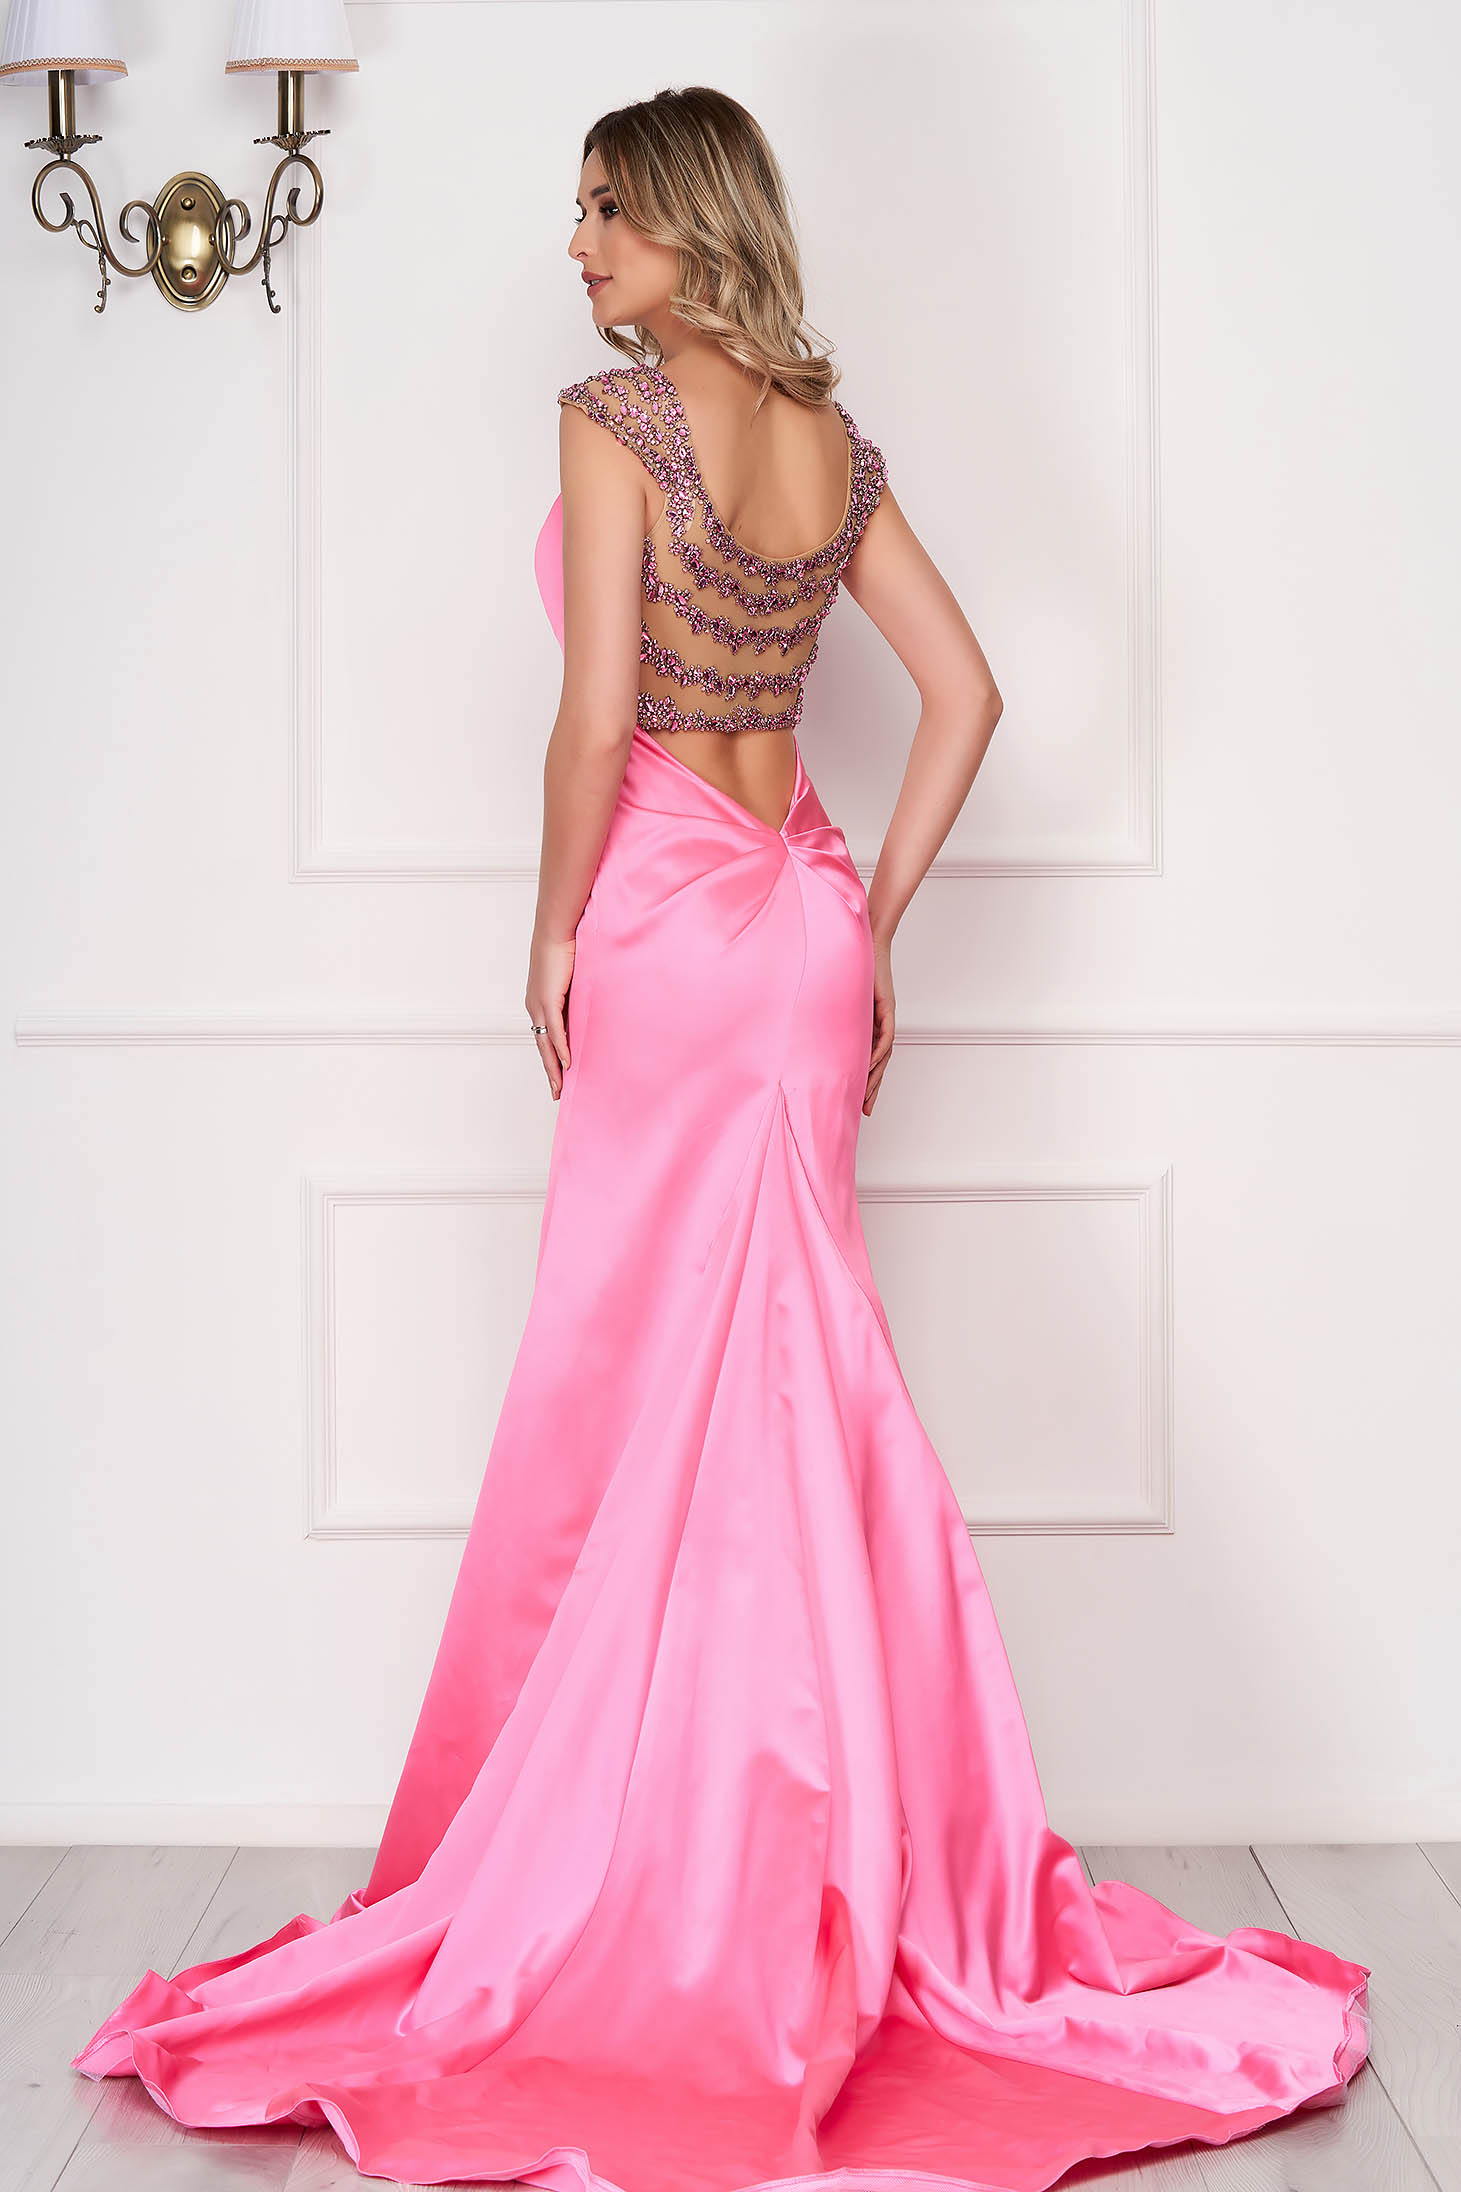 Sherri Hill pink dress luxurious long mermaid cut strass with braces with a cleavage 2 - StarShinerS.com